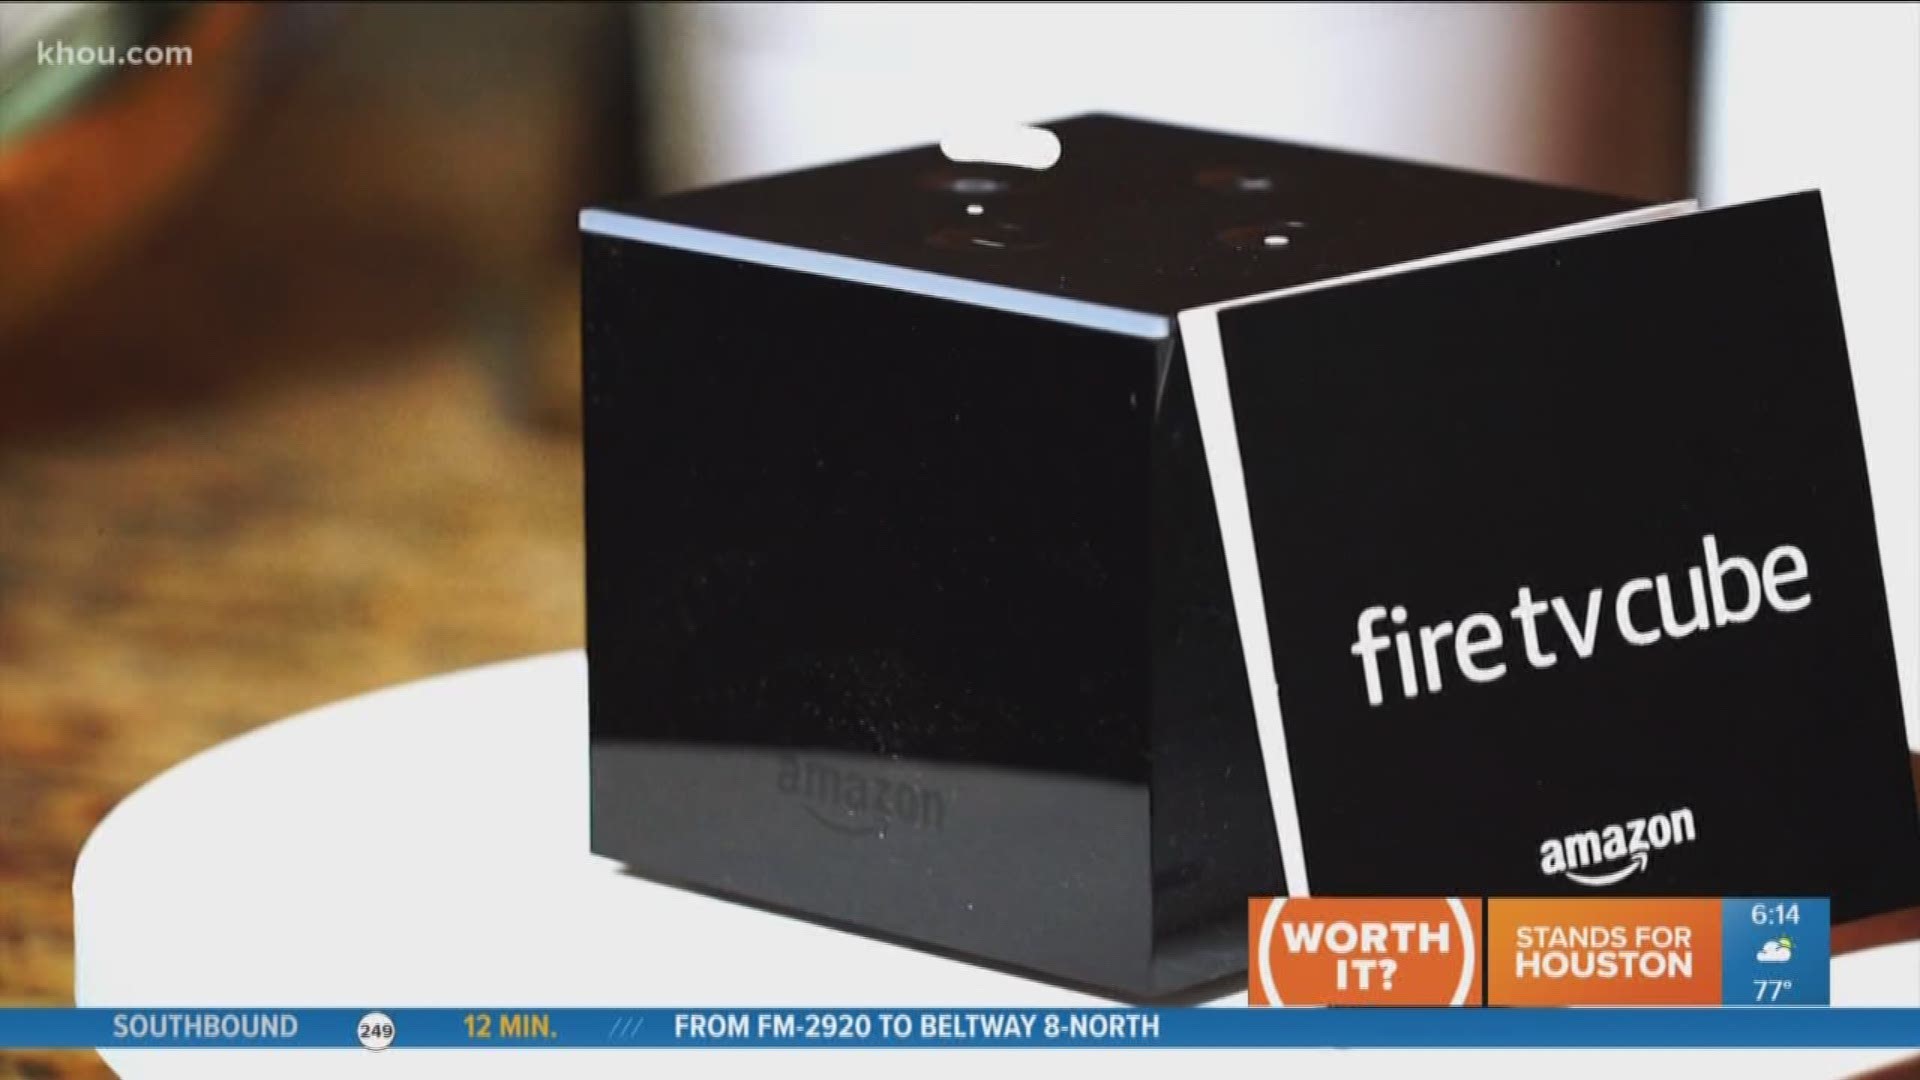 It's the Echo speaker "Alexa" and streaming content rolled into one. The new Amazon Fire TV Cube is currently priced at $119.99.